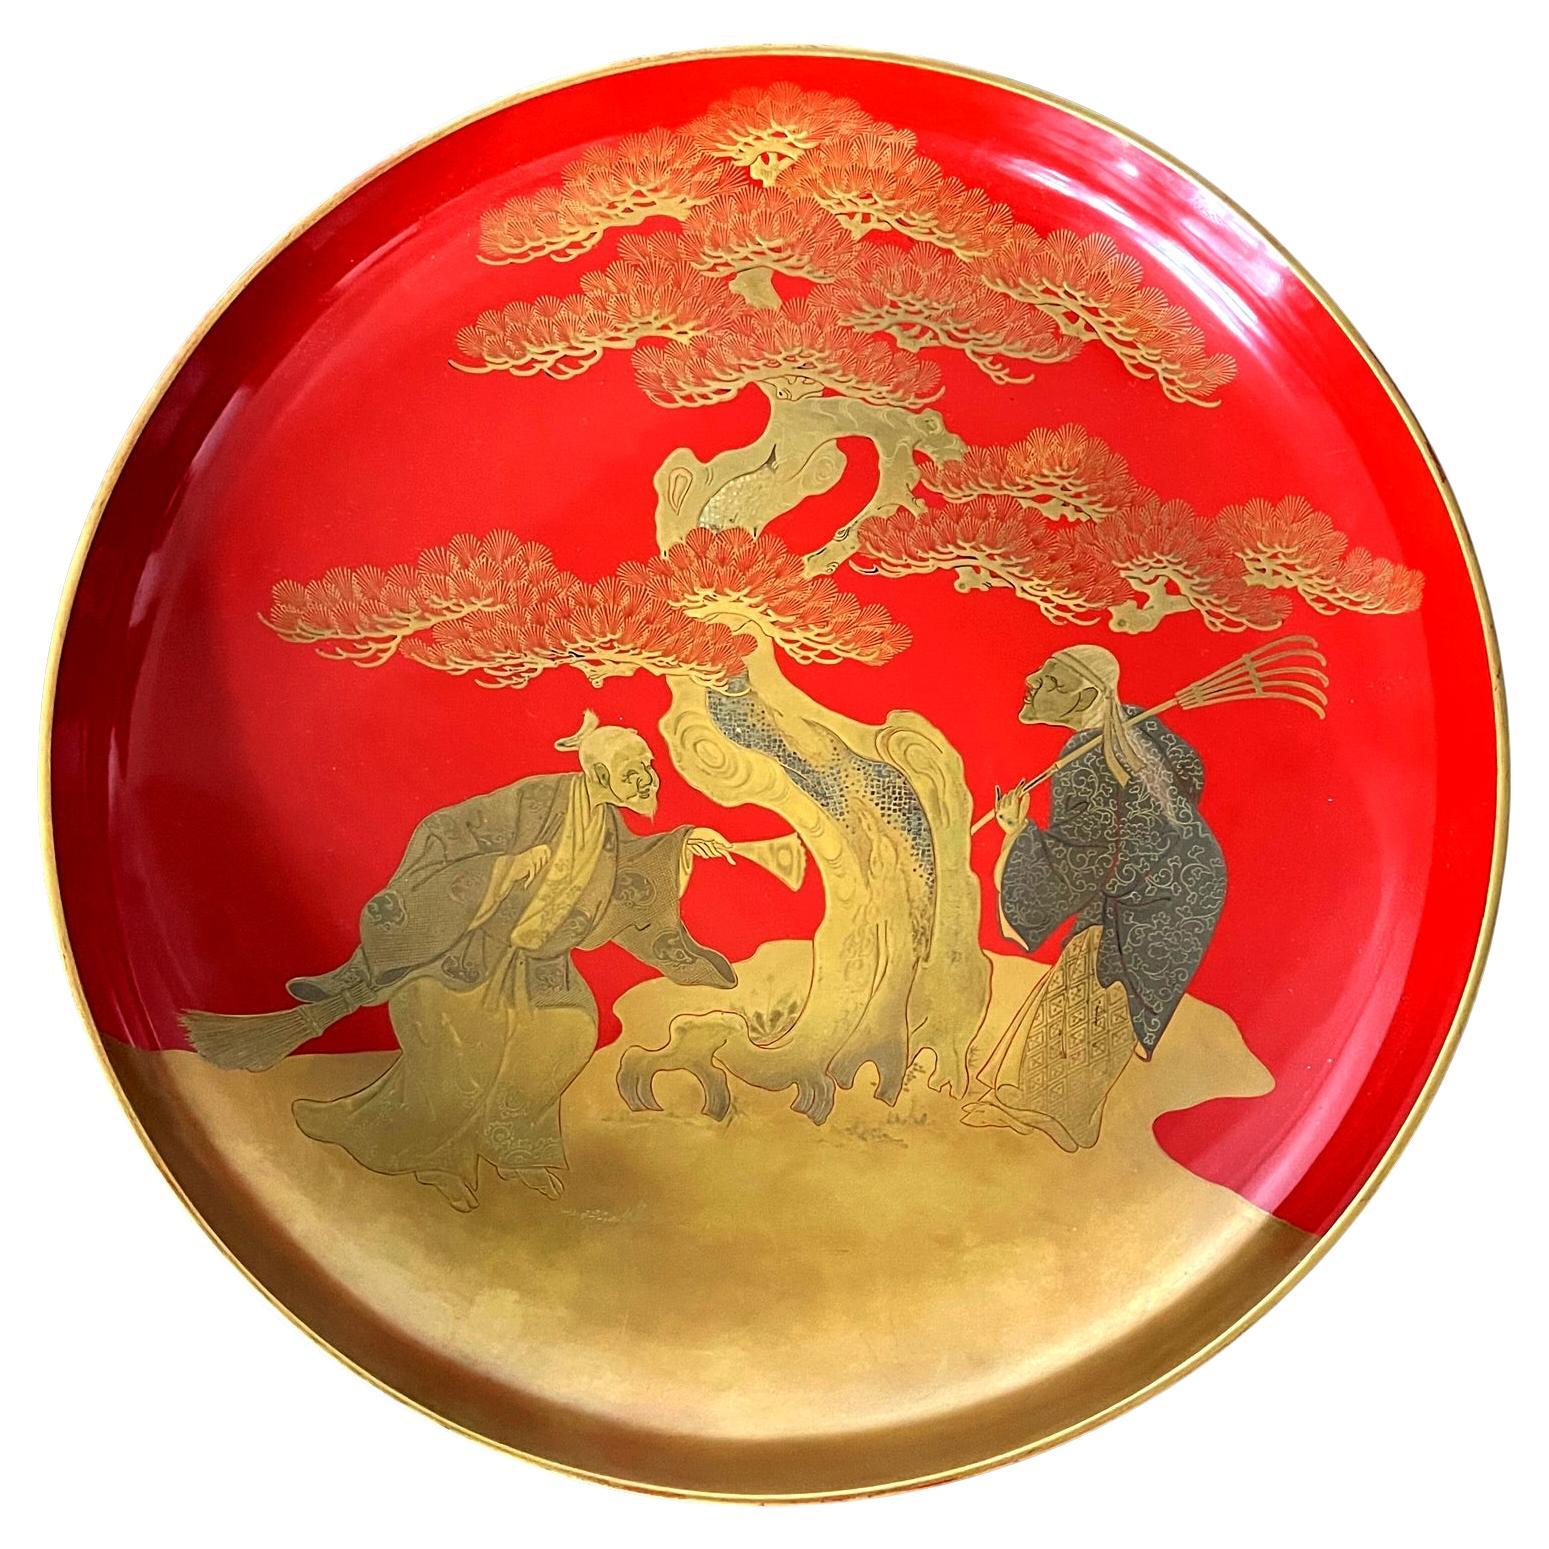 Japanese Lacquer Maki-e Plate of Takasago Story For Sale